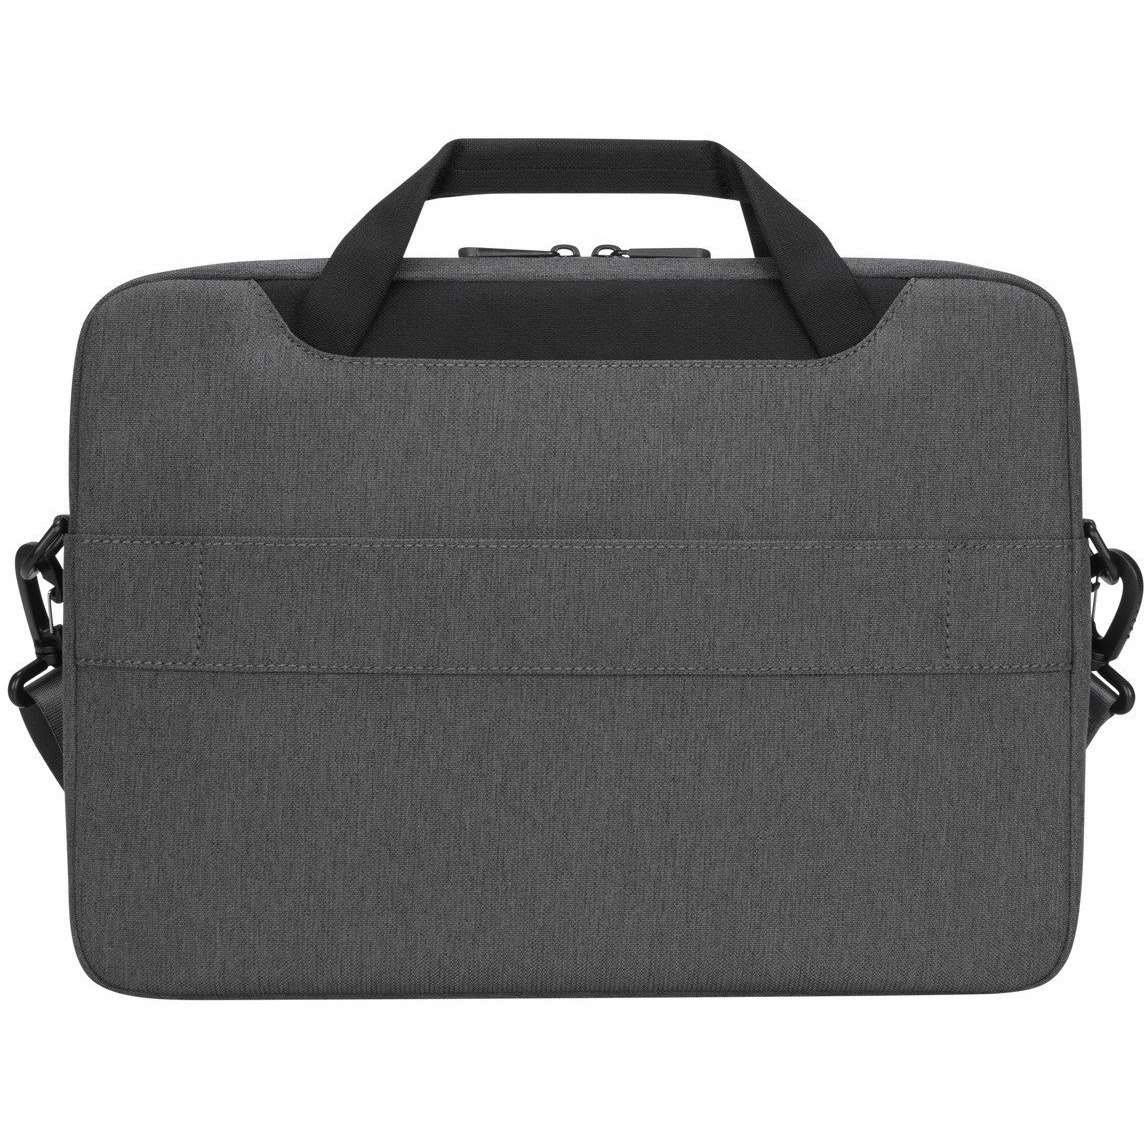 Targus Cypress TBS92602GL Carrying Case (Slipcase) for 13" to 14" Notebook - Gray